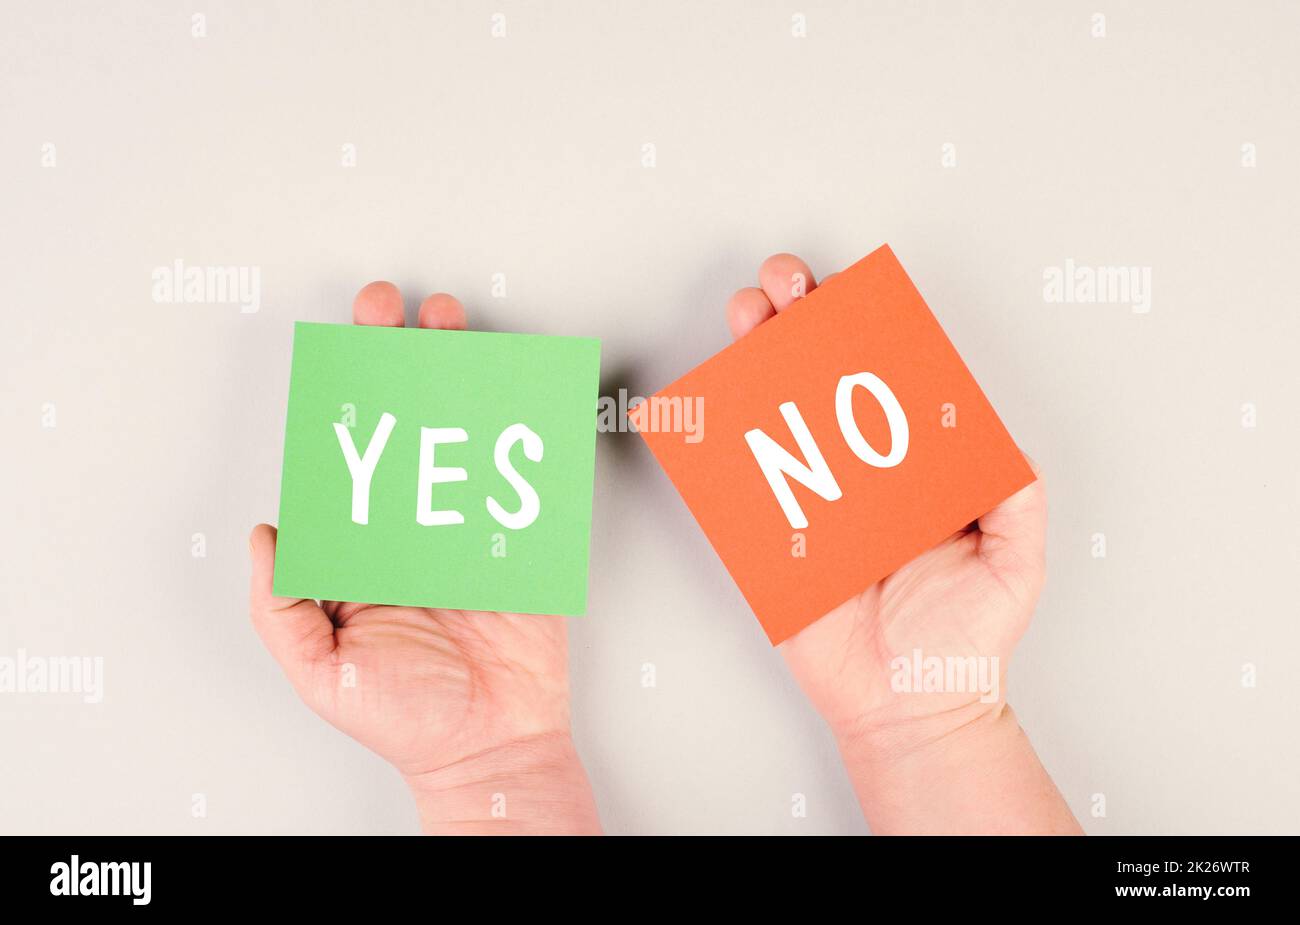 Paper in red and green color with the words yes and no, communication symbol, business concept, minimalism, asking questions Stock Photo